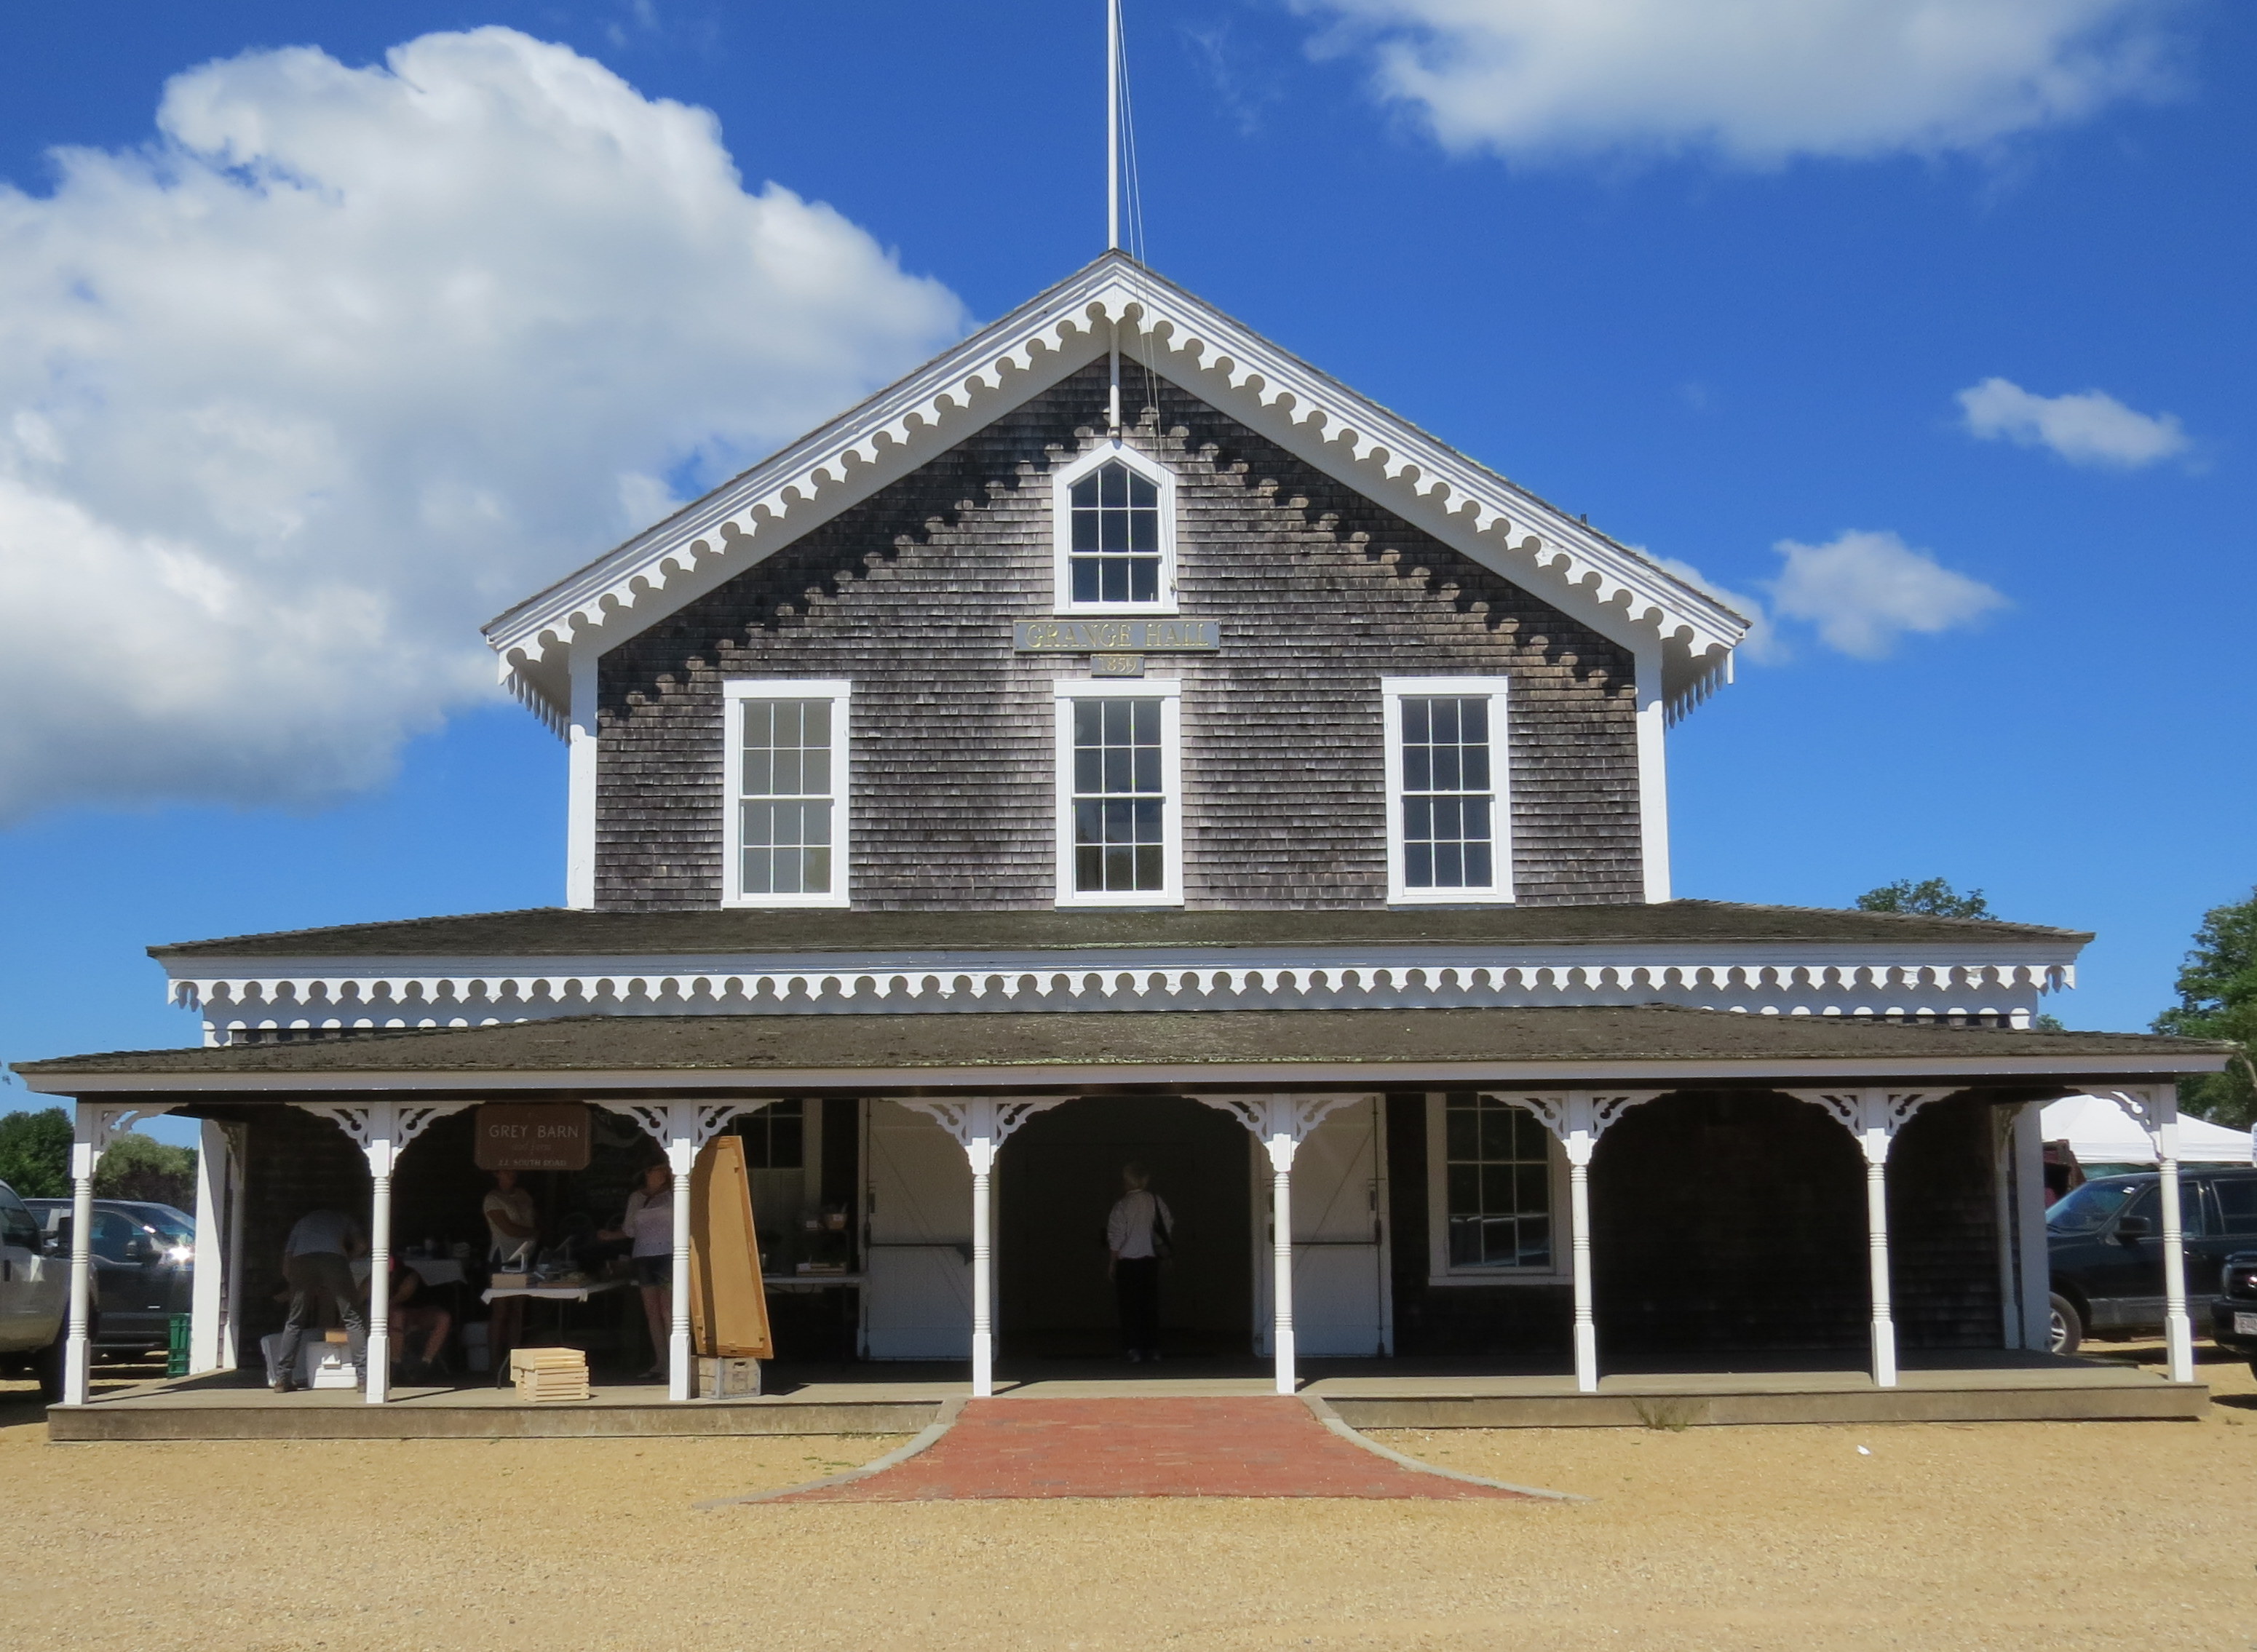 Grange Hall, Home of the West Tisbury Farmers Market